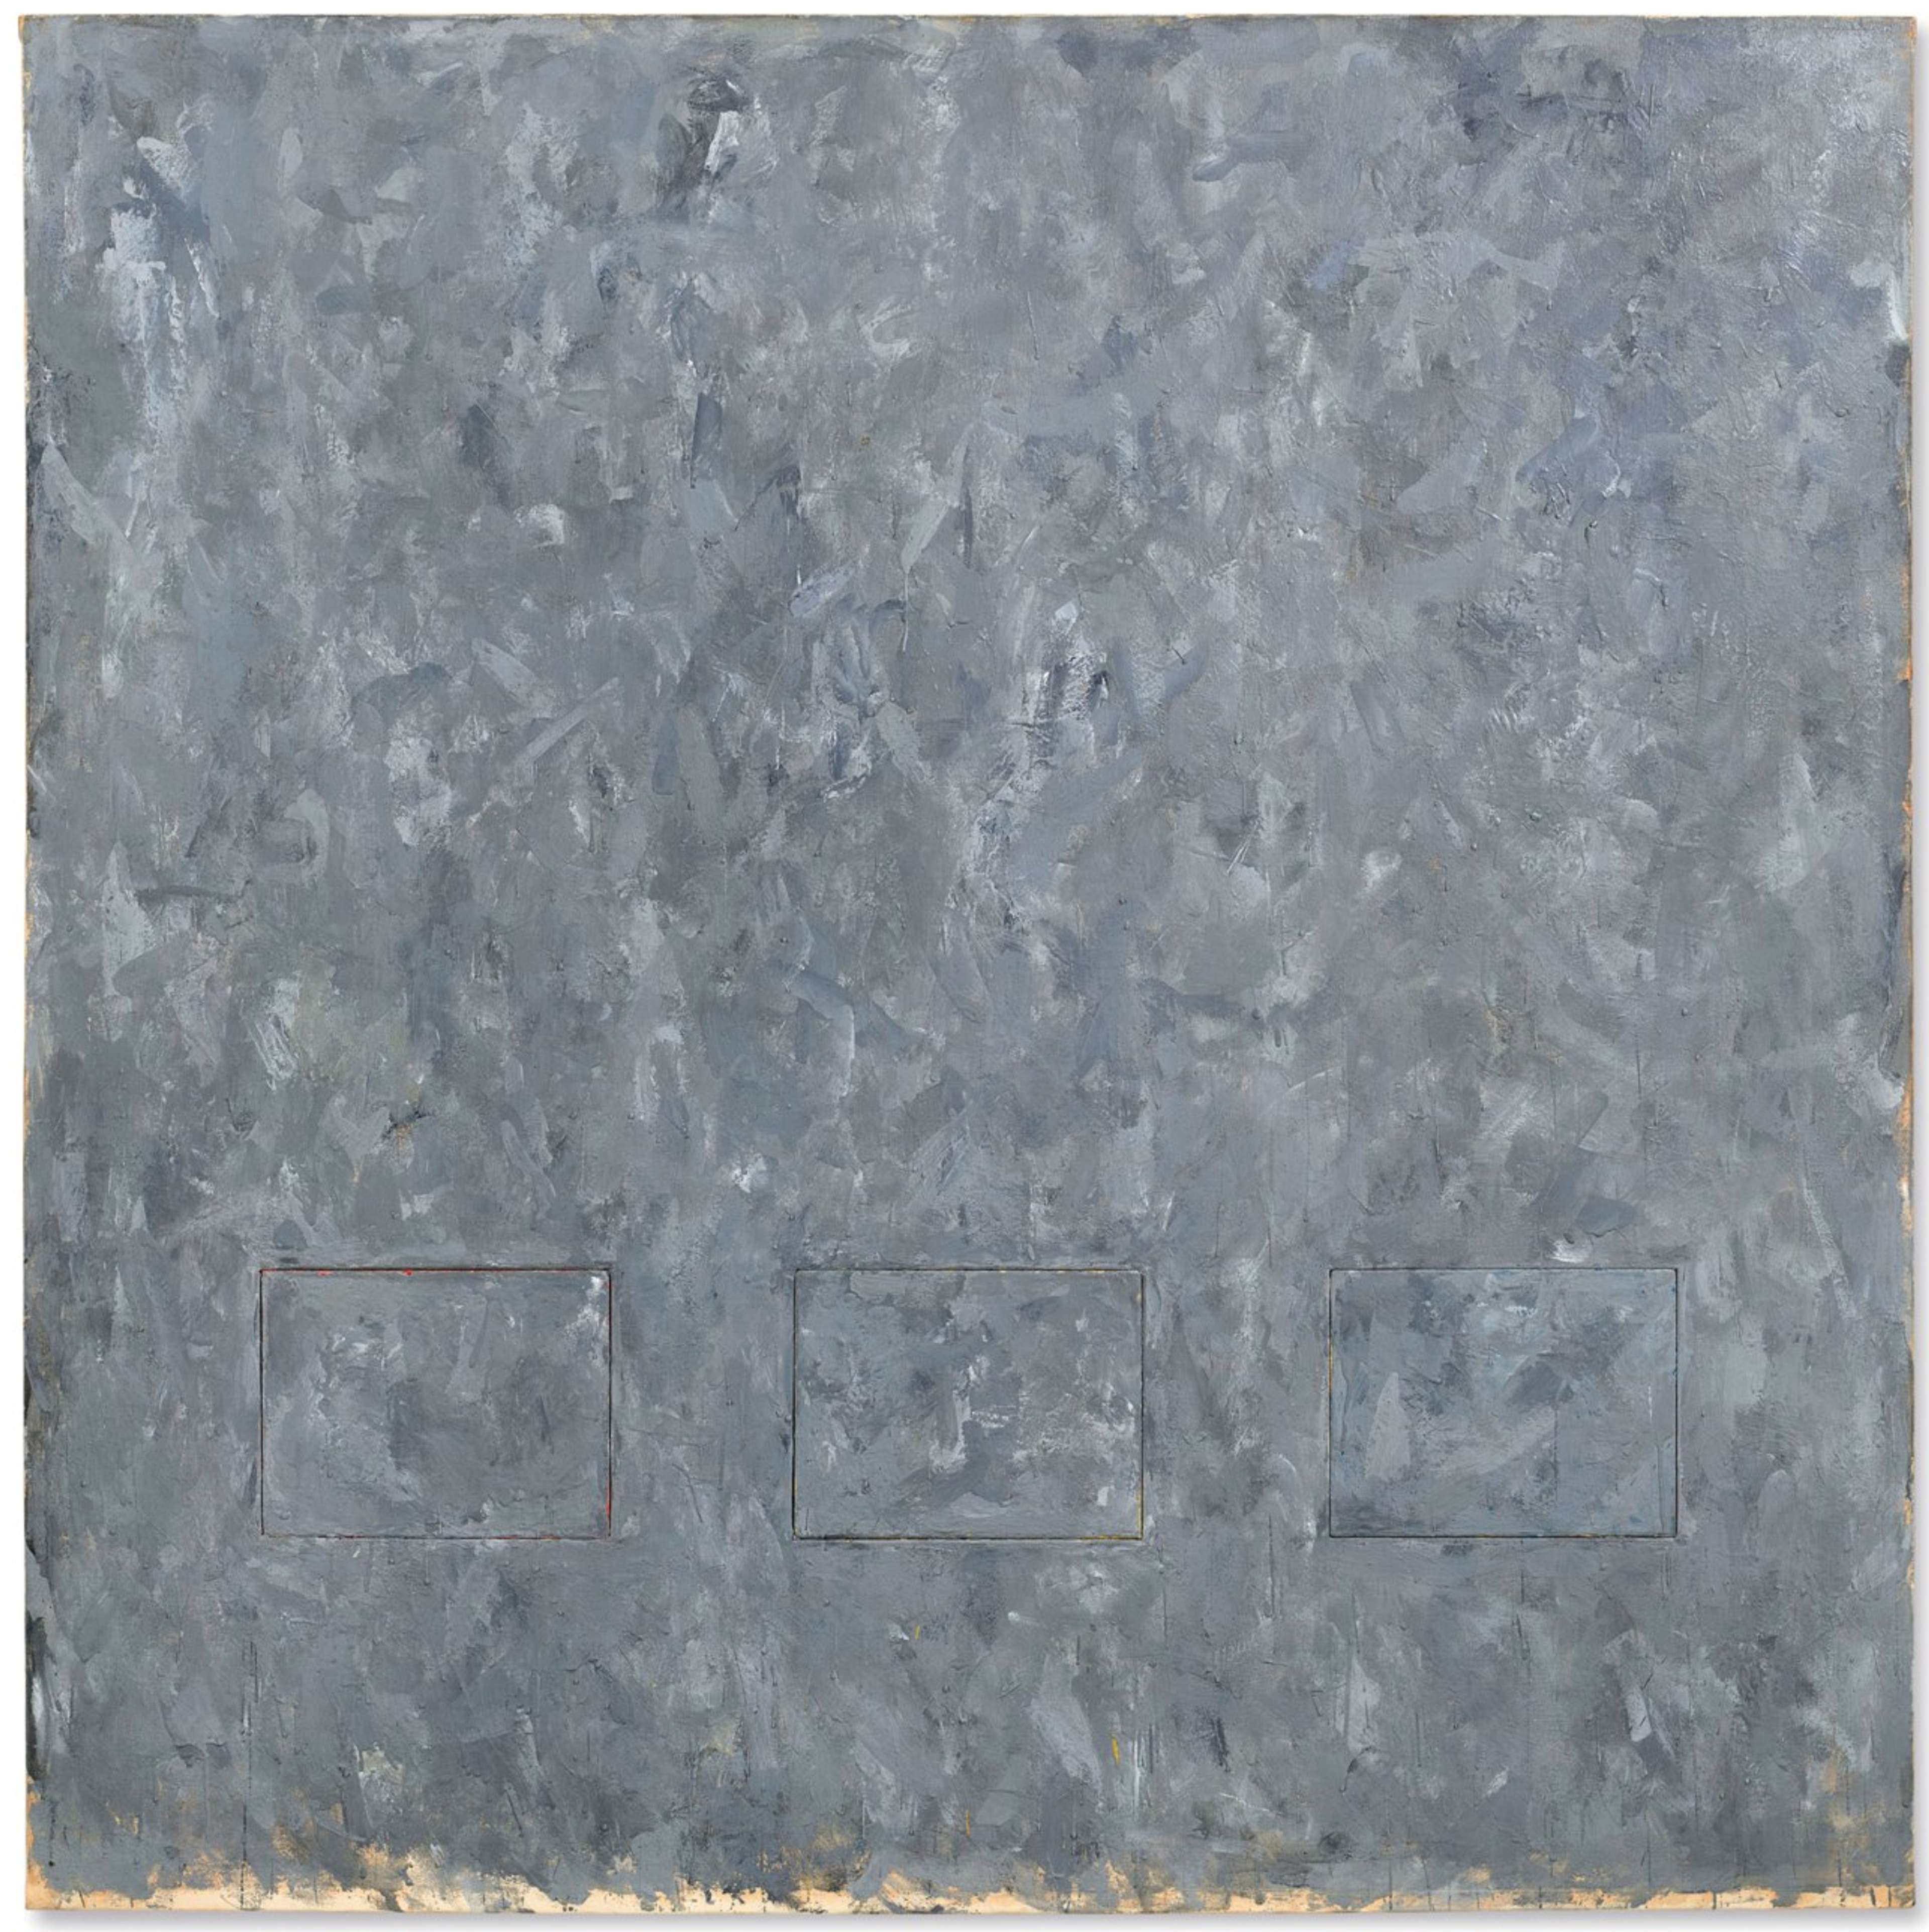 A gray abstract canvas by Jasper Johns displaying expressive brushwork in different tones, featuring three positioned rectangles in the lower section of the artwork.